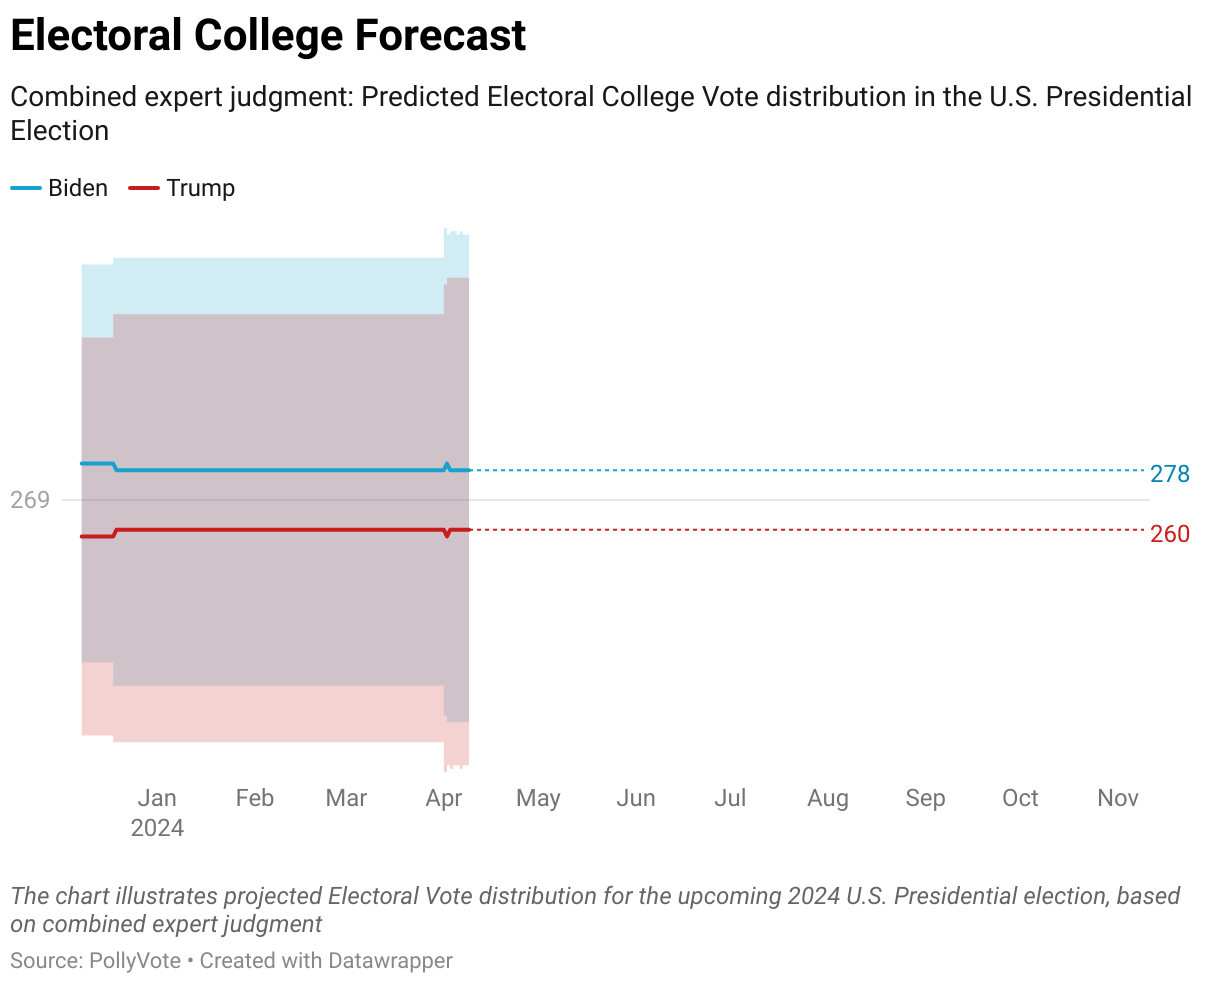 The chart illustrates projected Electoral Vote distribution for the upcoming 2024 U.S. Presidential election, based on combined expert judgment